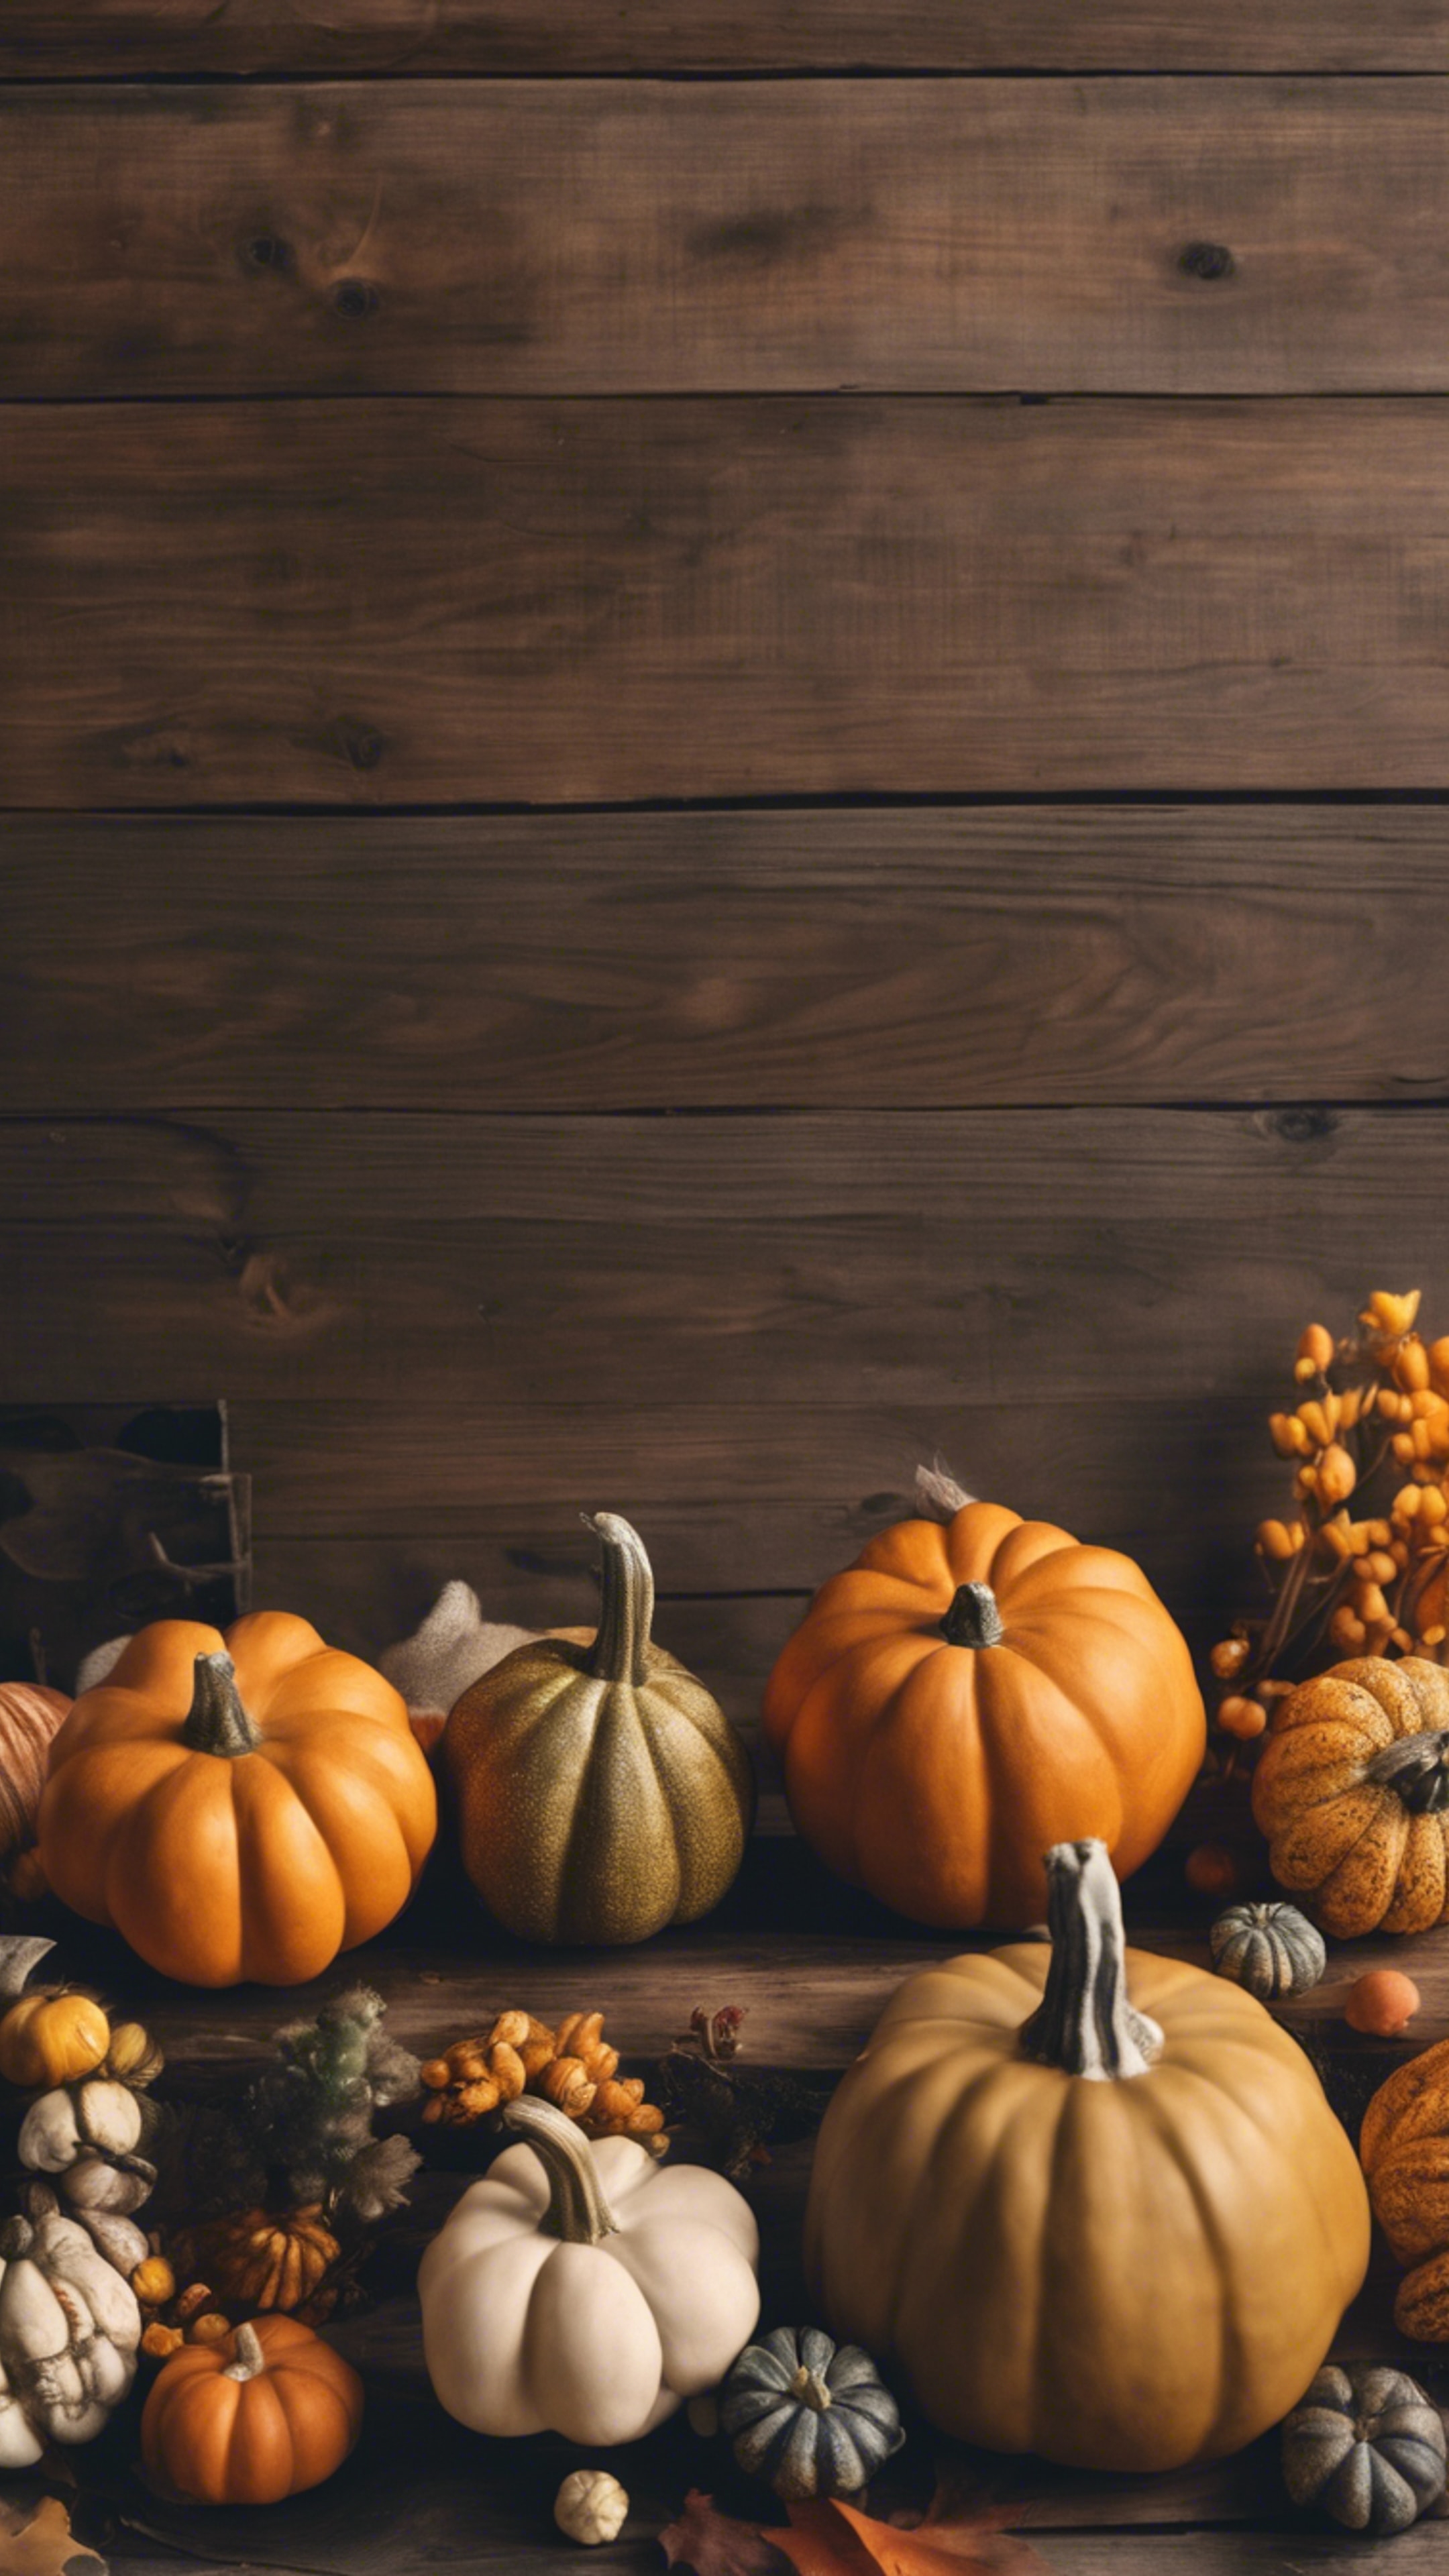 Thanksgiving decoration featuring decorative gourds and pumpkins arranged aesthetically on a vintage wooden table. Wallpaper[c4e18f2e2d2f4603a4df]